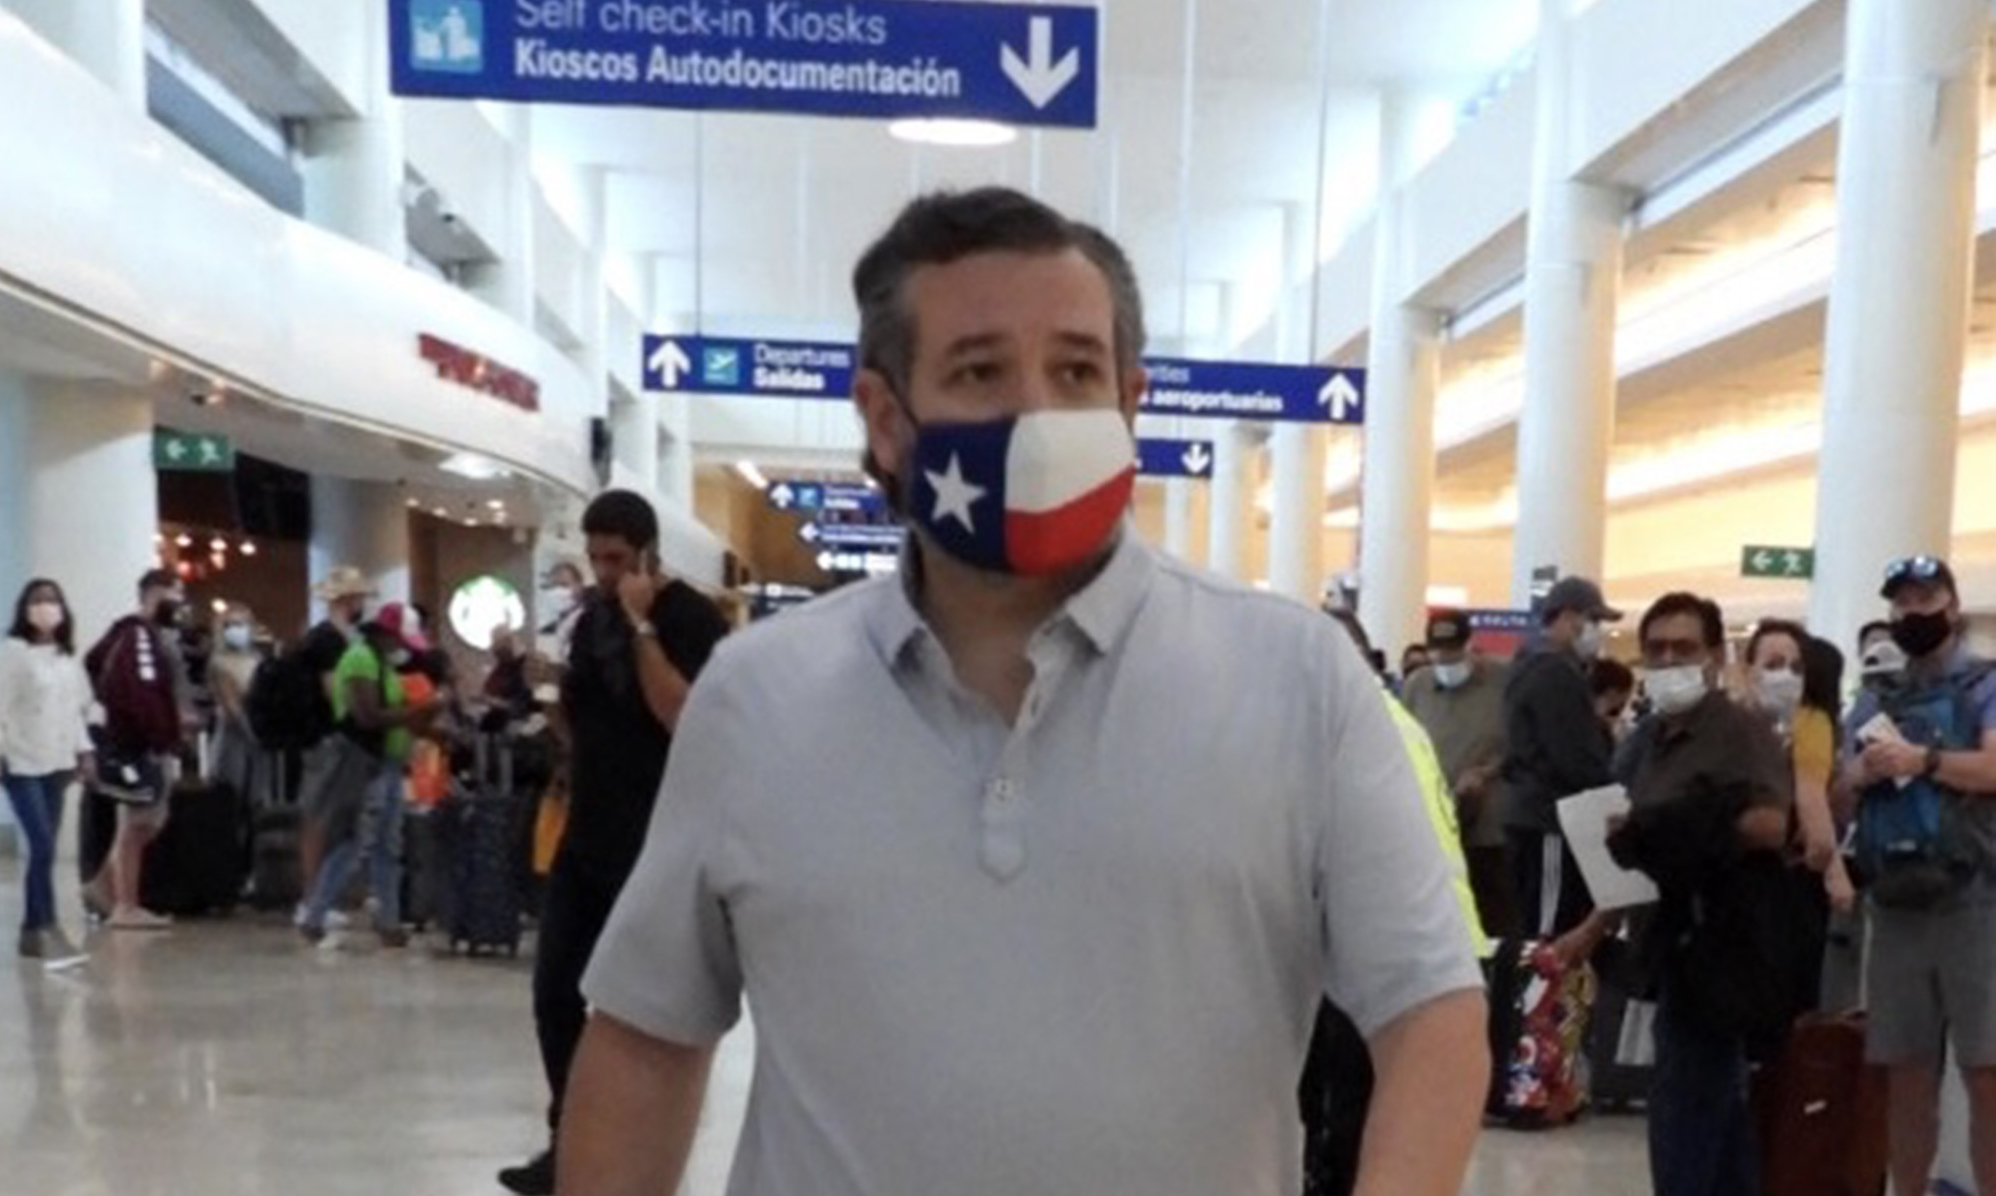 Critics accuse Ted Cruz of ‘false compassion’ as he distributes water after trip to Mexico